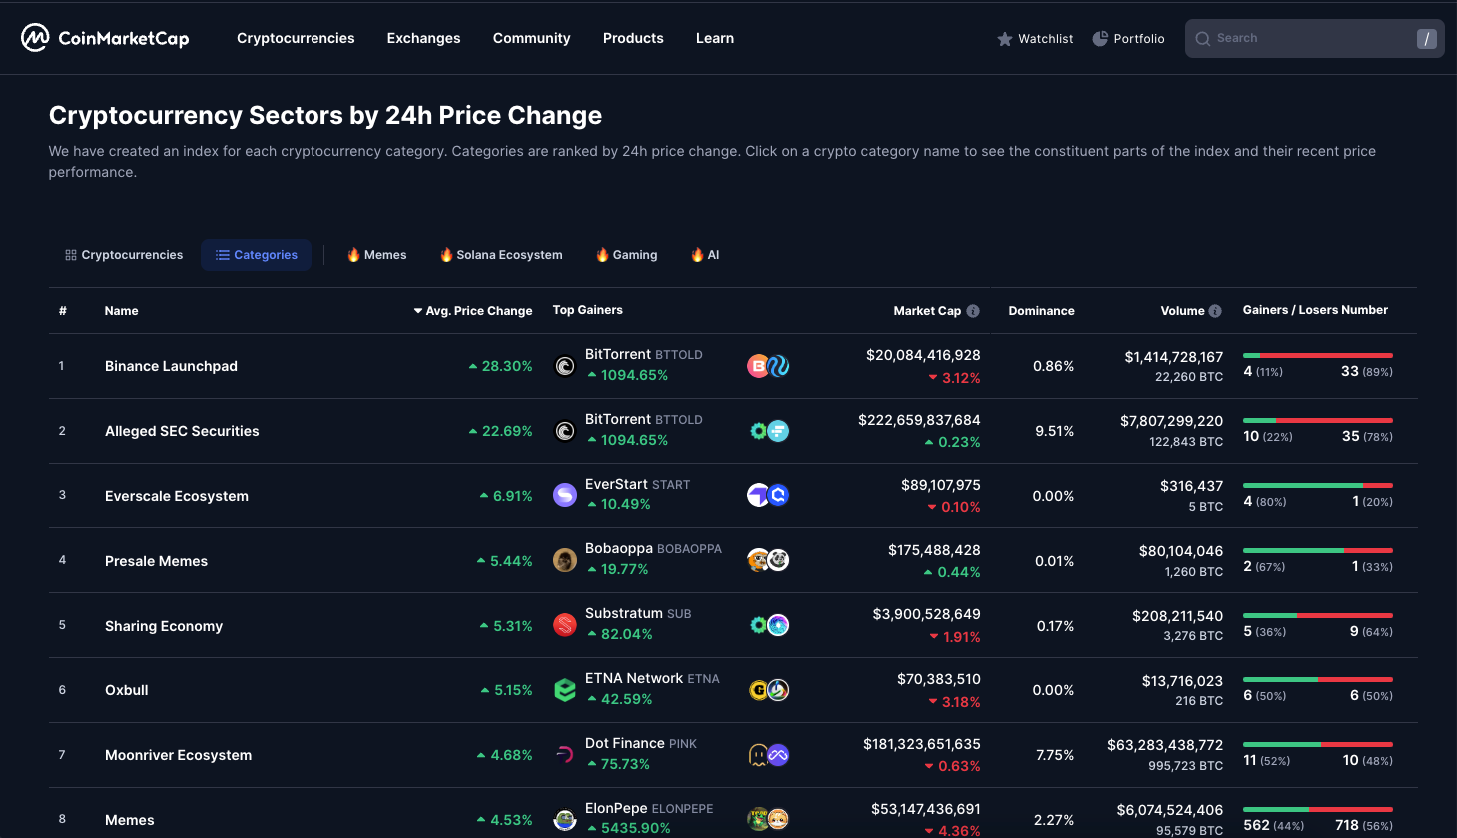 The front page of Coinmarketcap